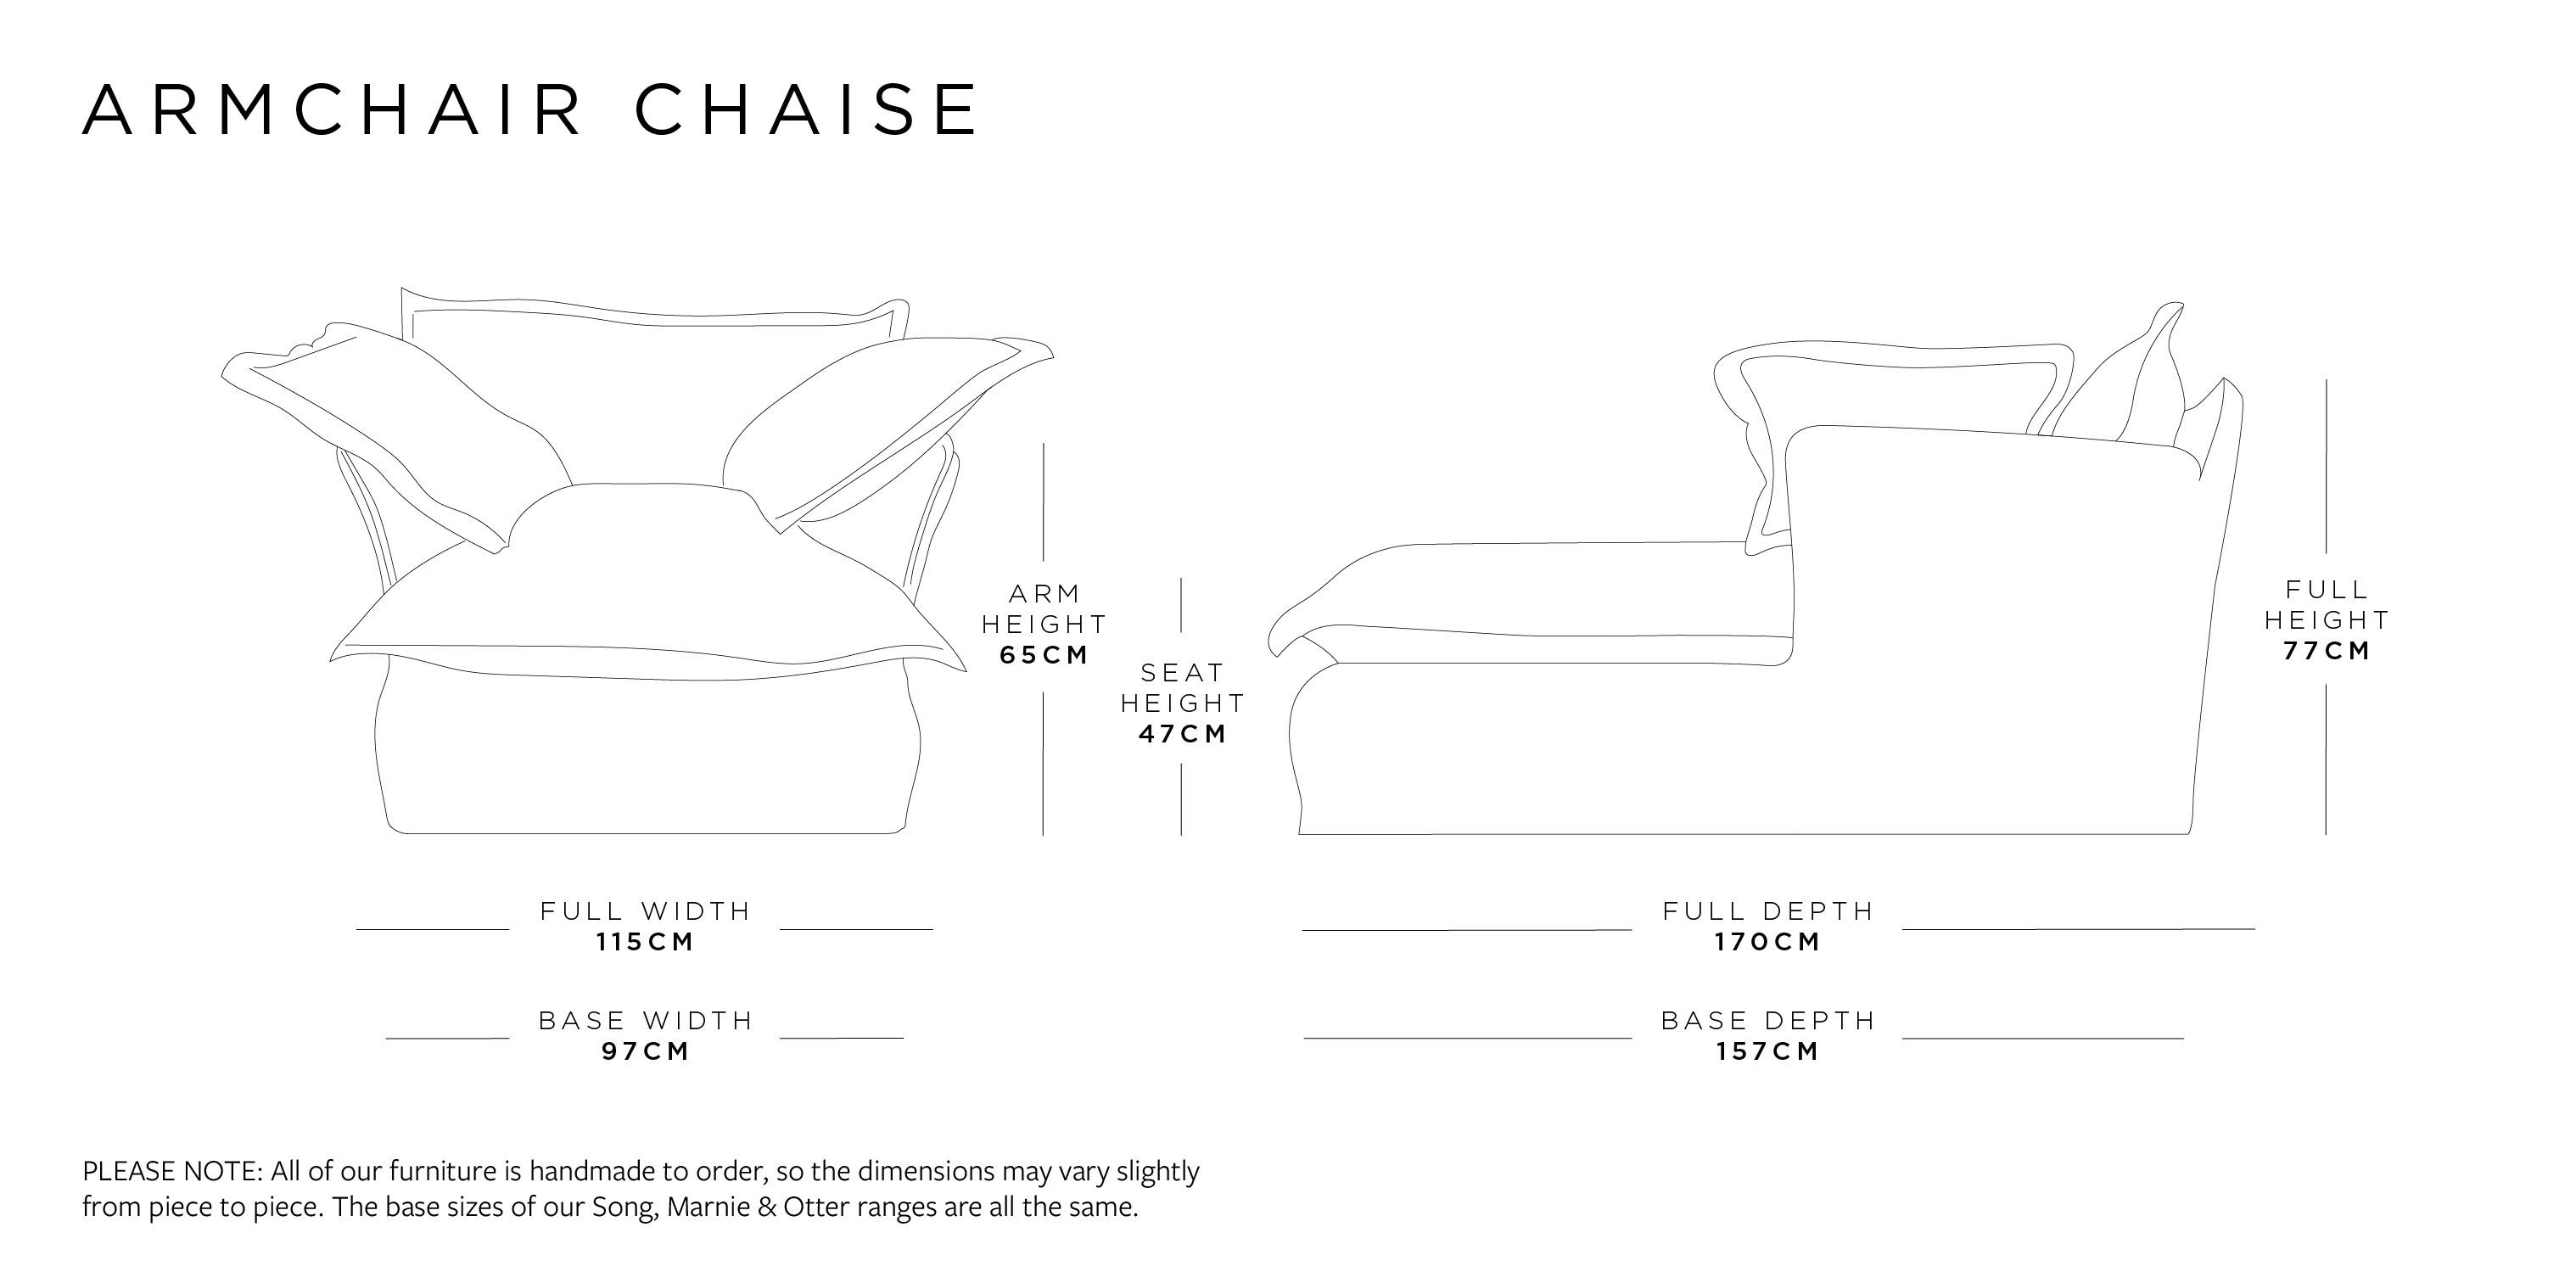 Armchair Chaise | Song Range Size Guide